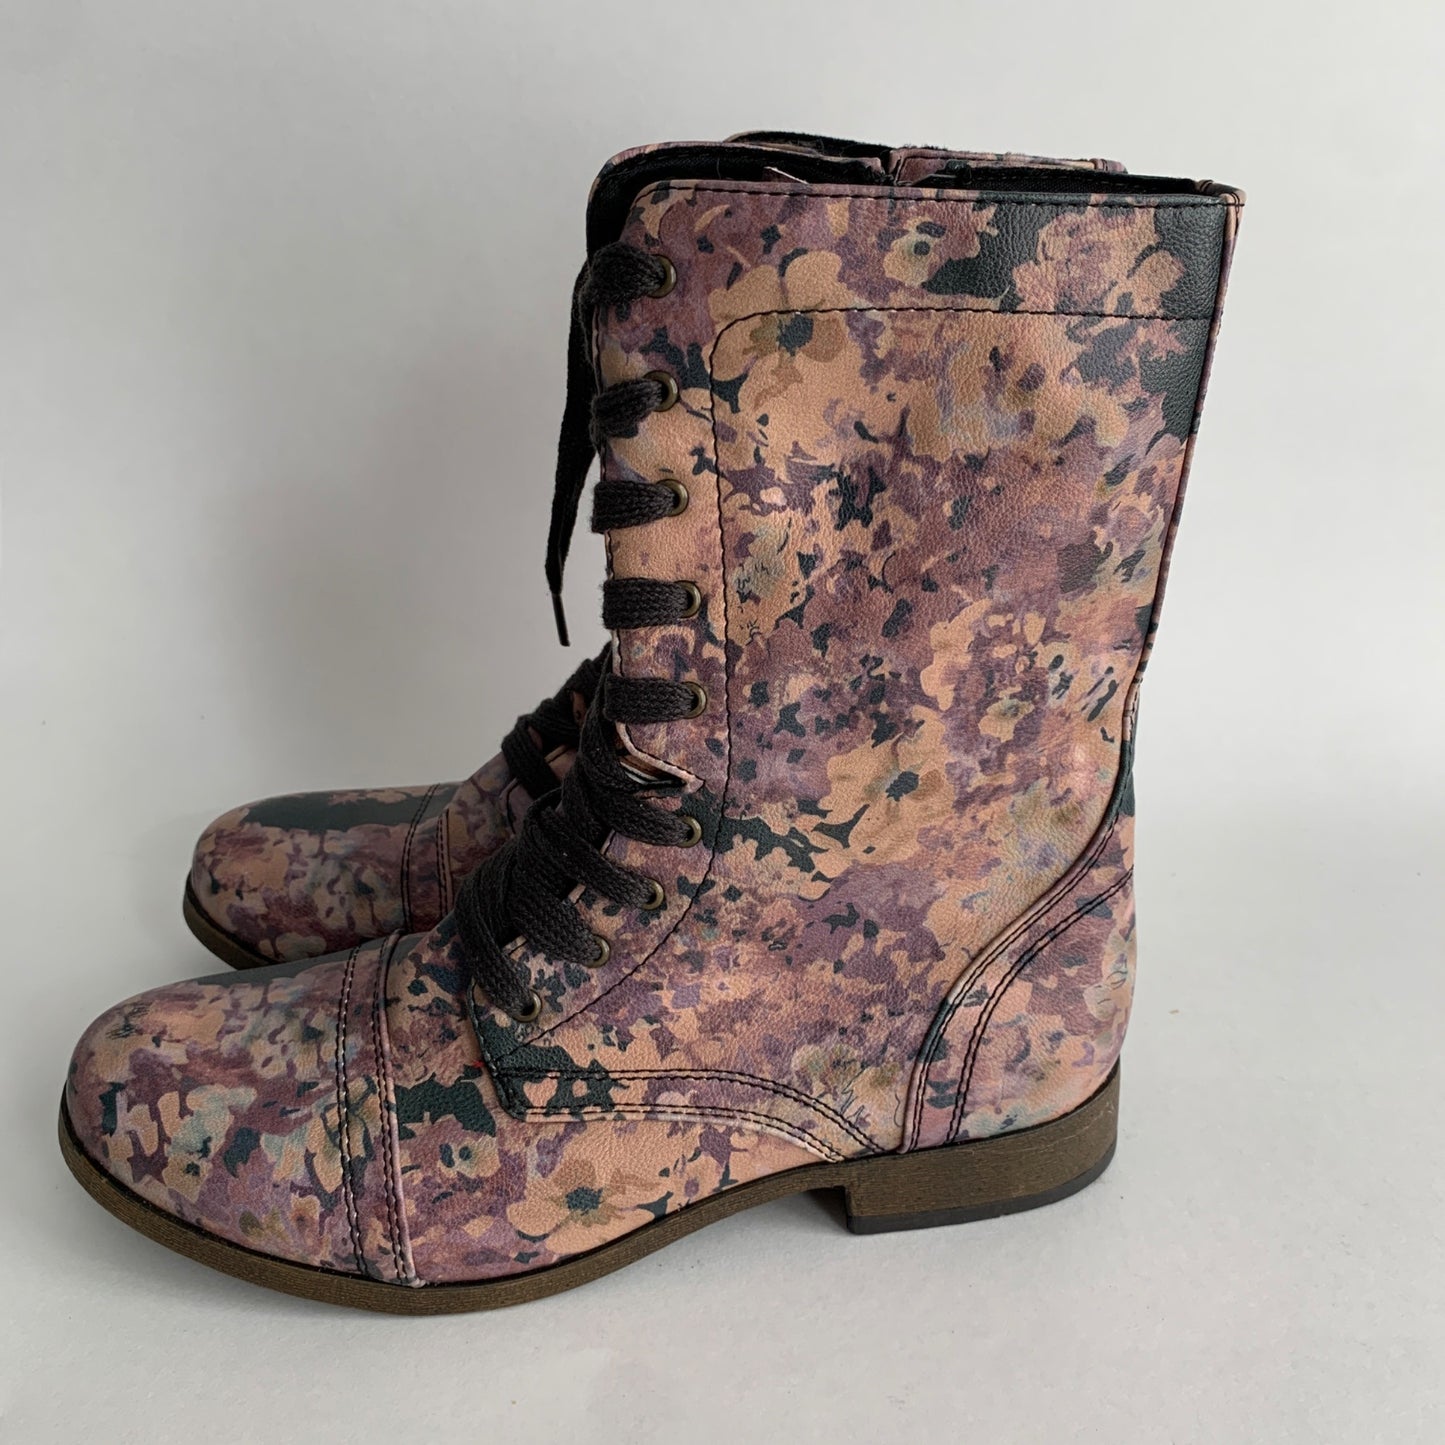 NEW Mossimo Khalea Floral Combat Boots 8.5 with Tags